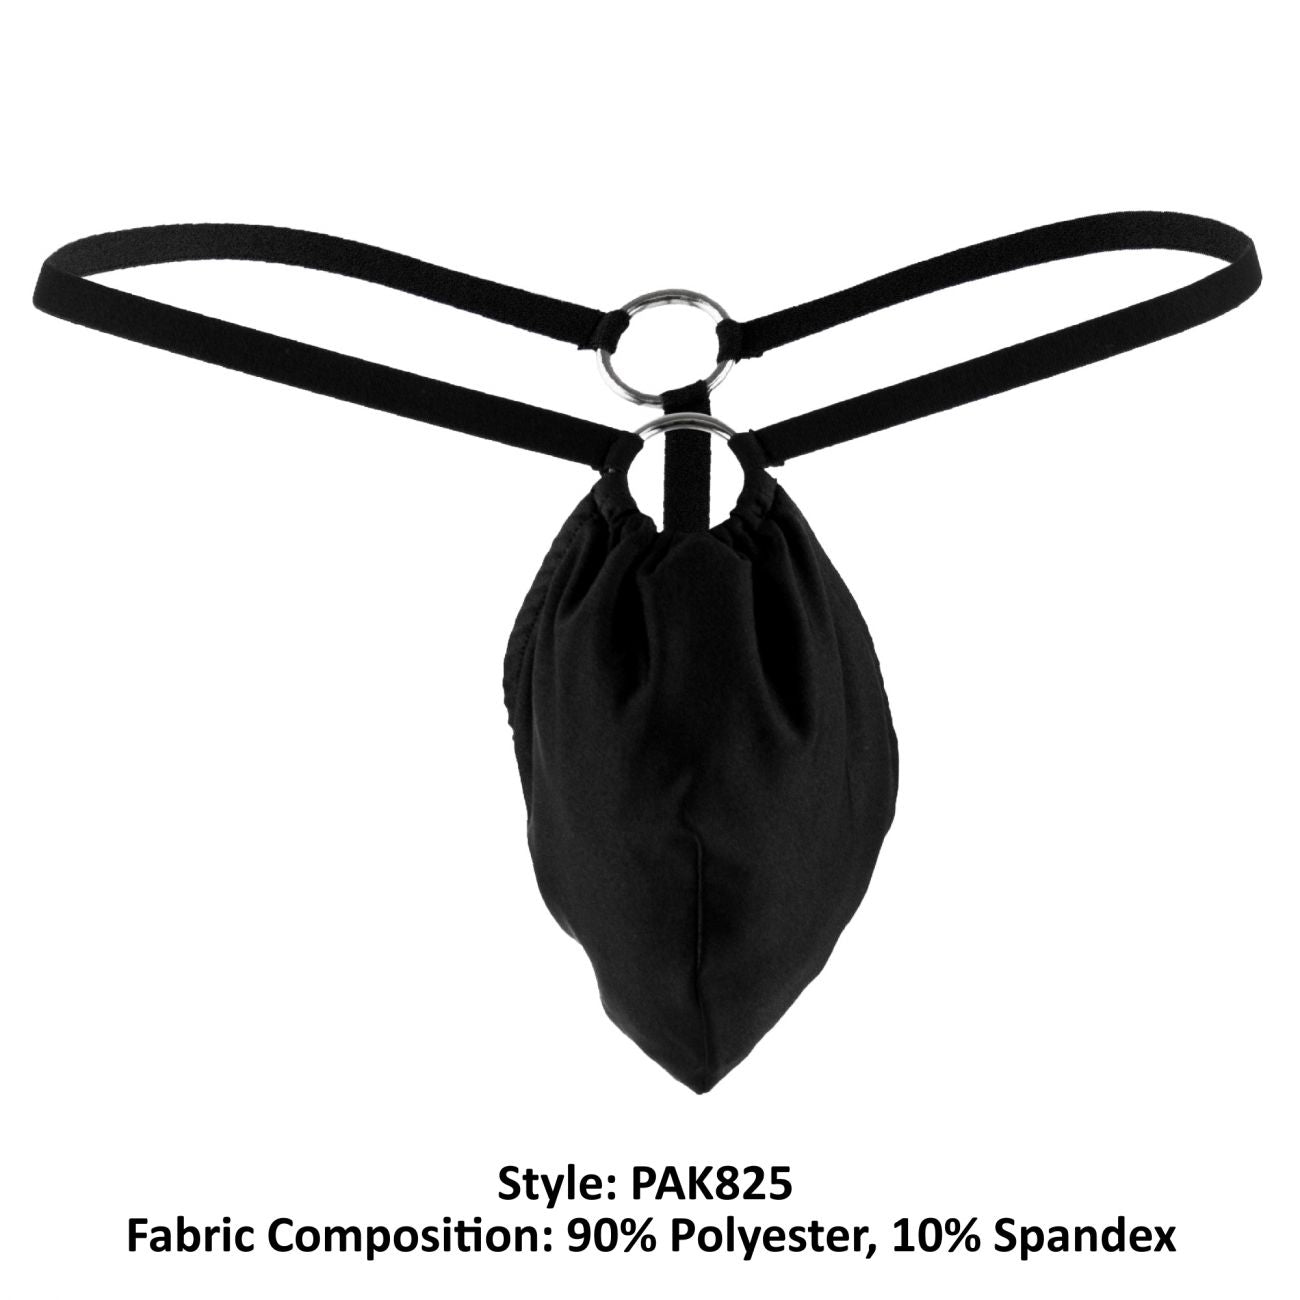 Male Power PAK825 G-String with front Ring